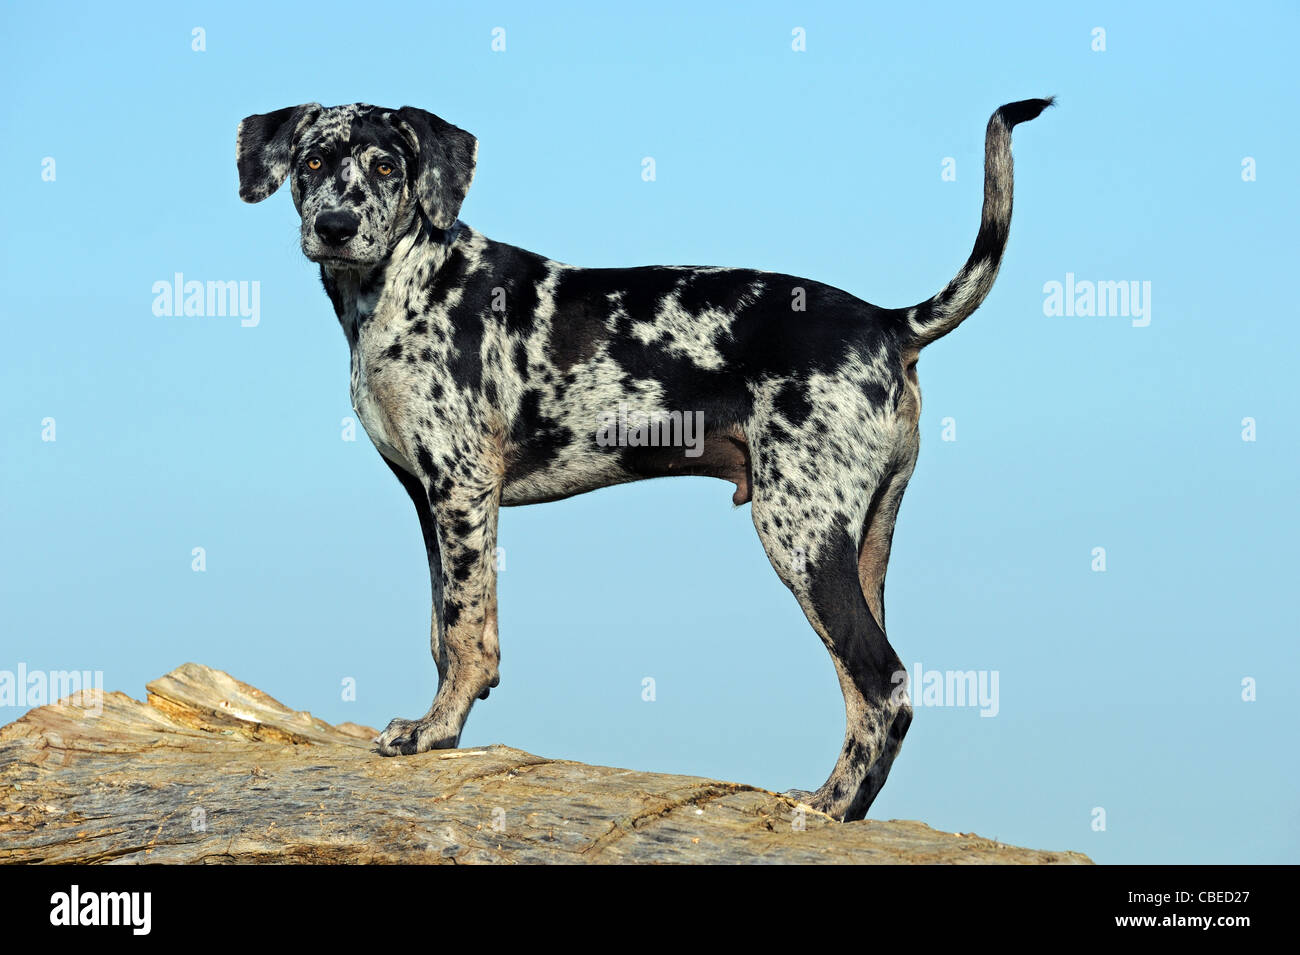 Louisiana Catahoula Leopard Dog (Canis lupus familiaris). Puppy standing on a tree trunk. Stock Photo